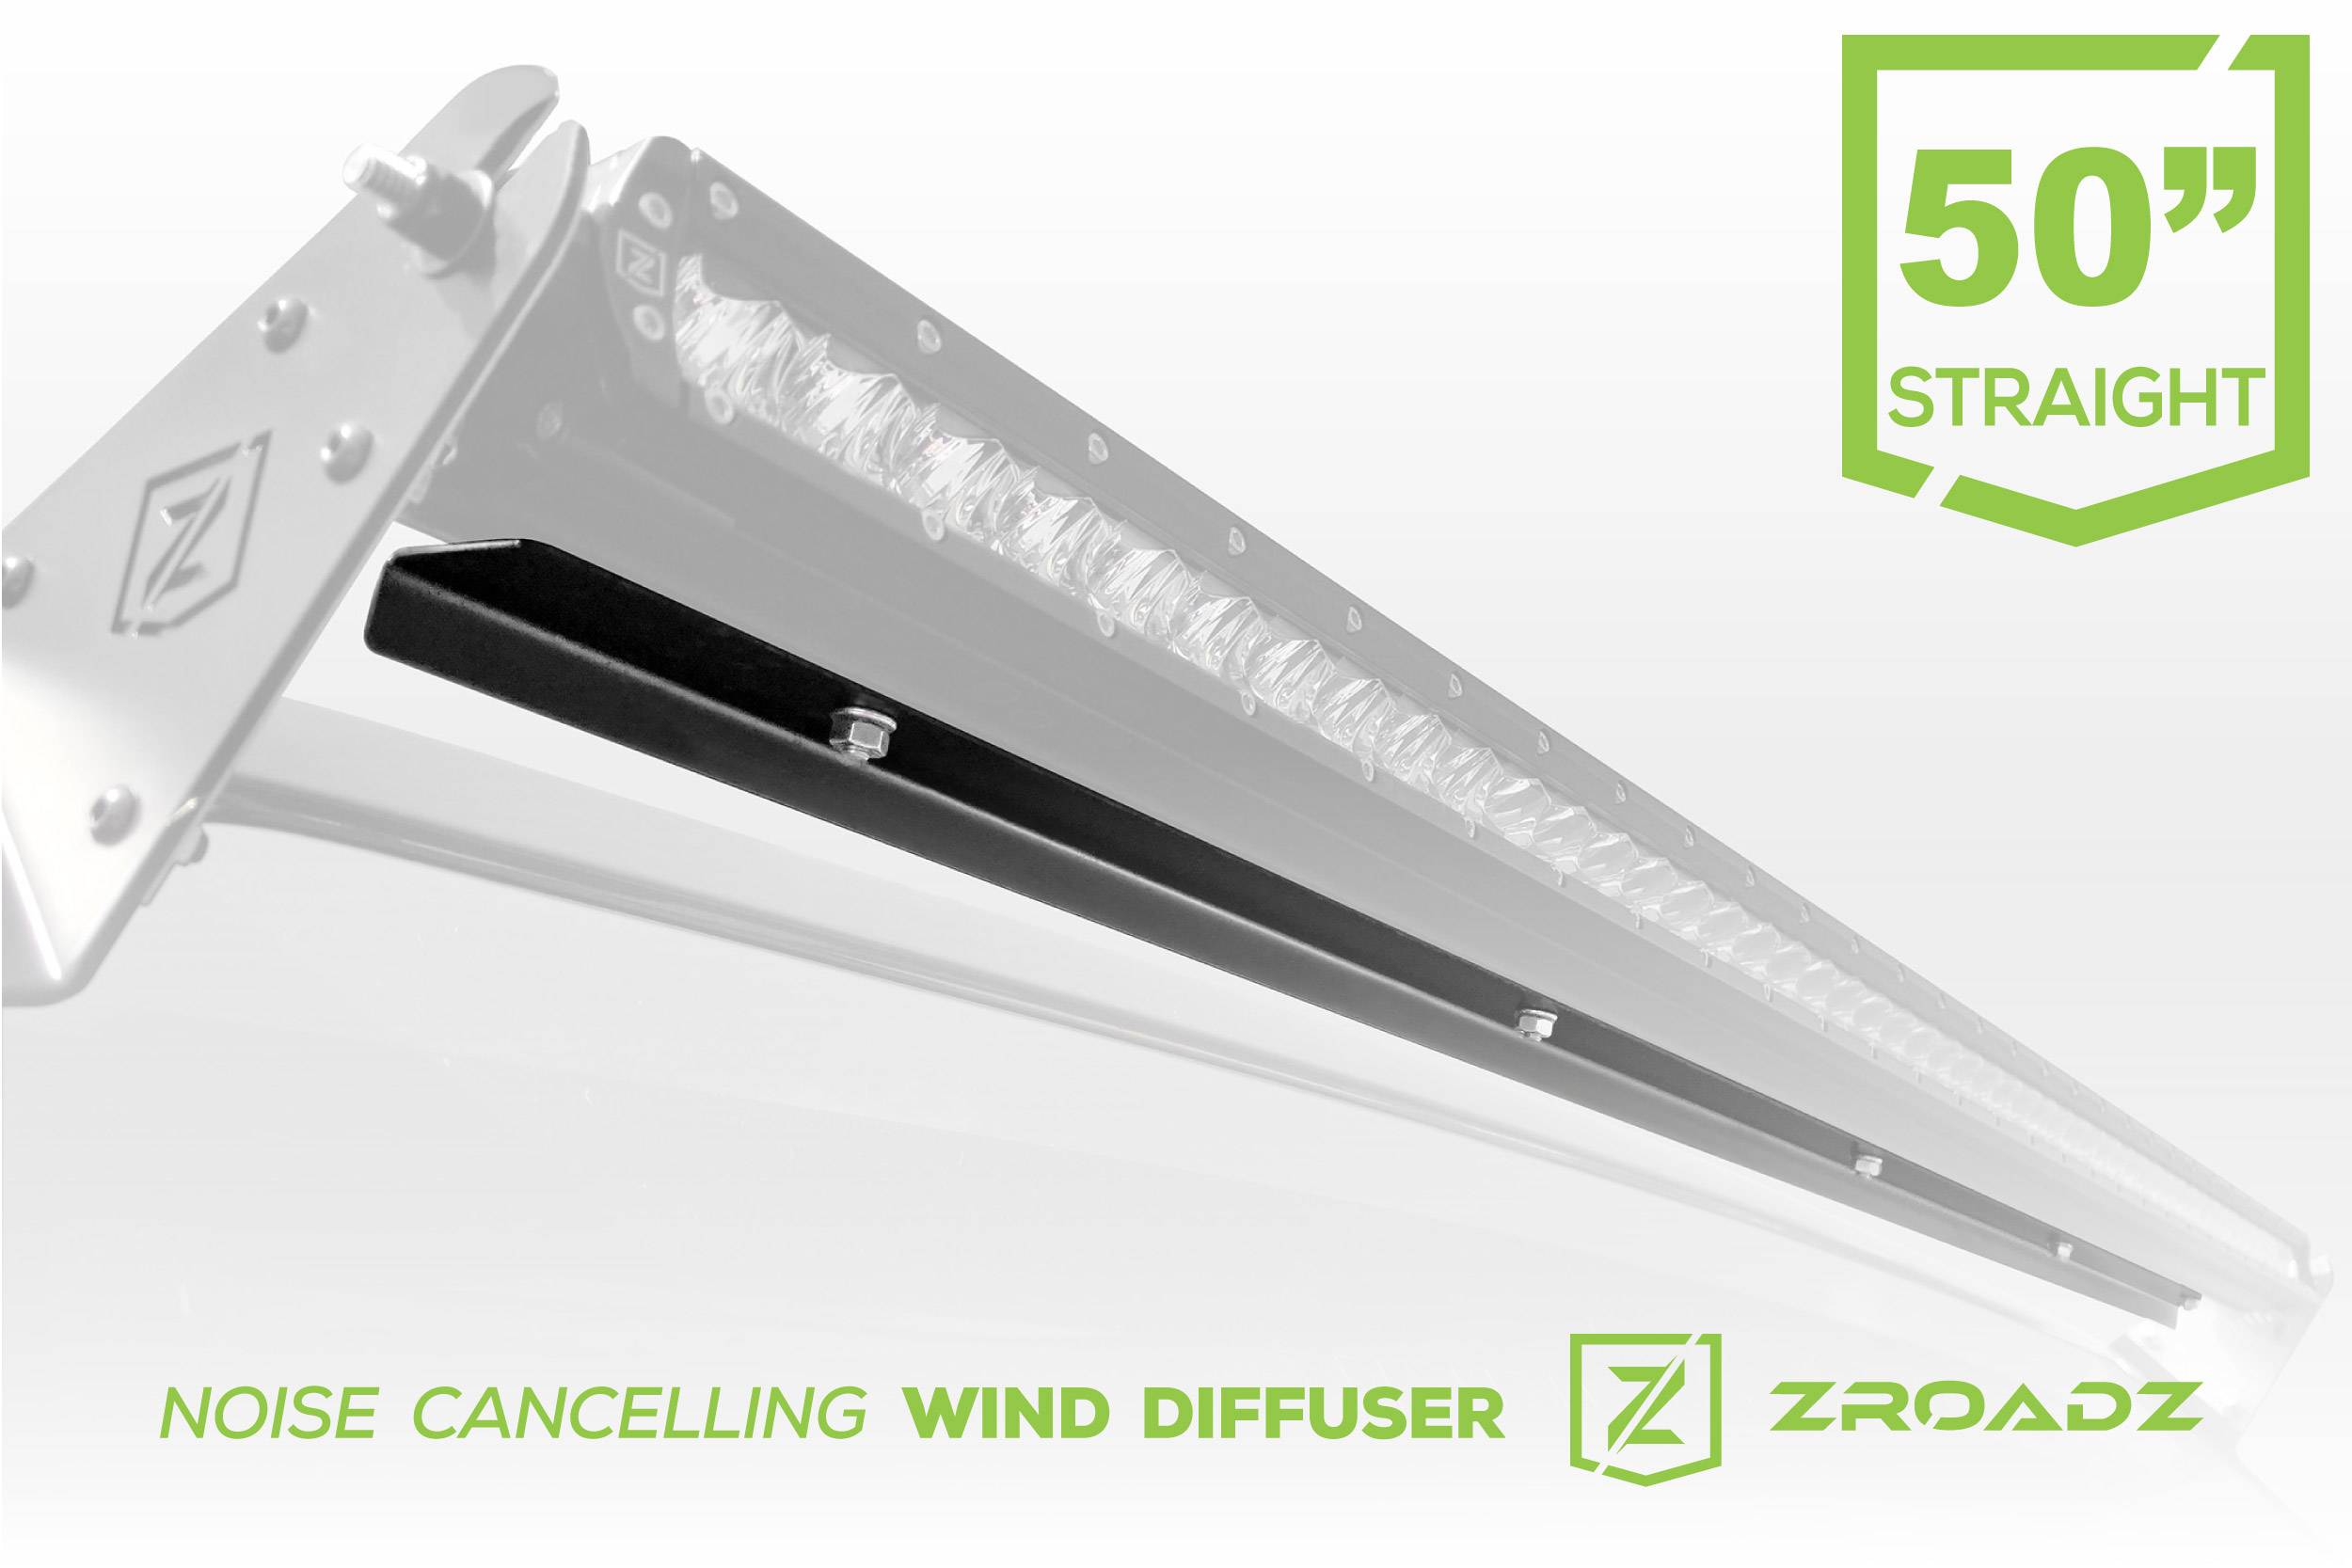 ZROADZ OFF ROAD PRODUCTS - Noise Cancelling Wind Diffuser for 50 Inch Straight Single Row LED Light Bar - PN #Z330051S